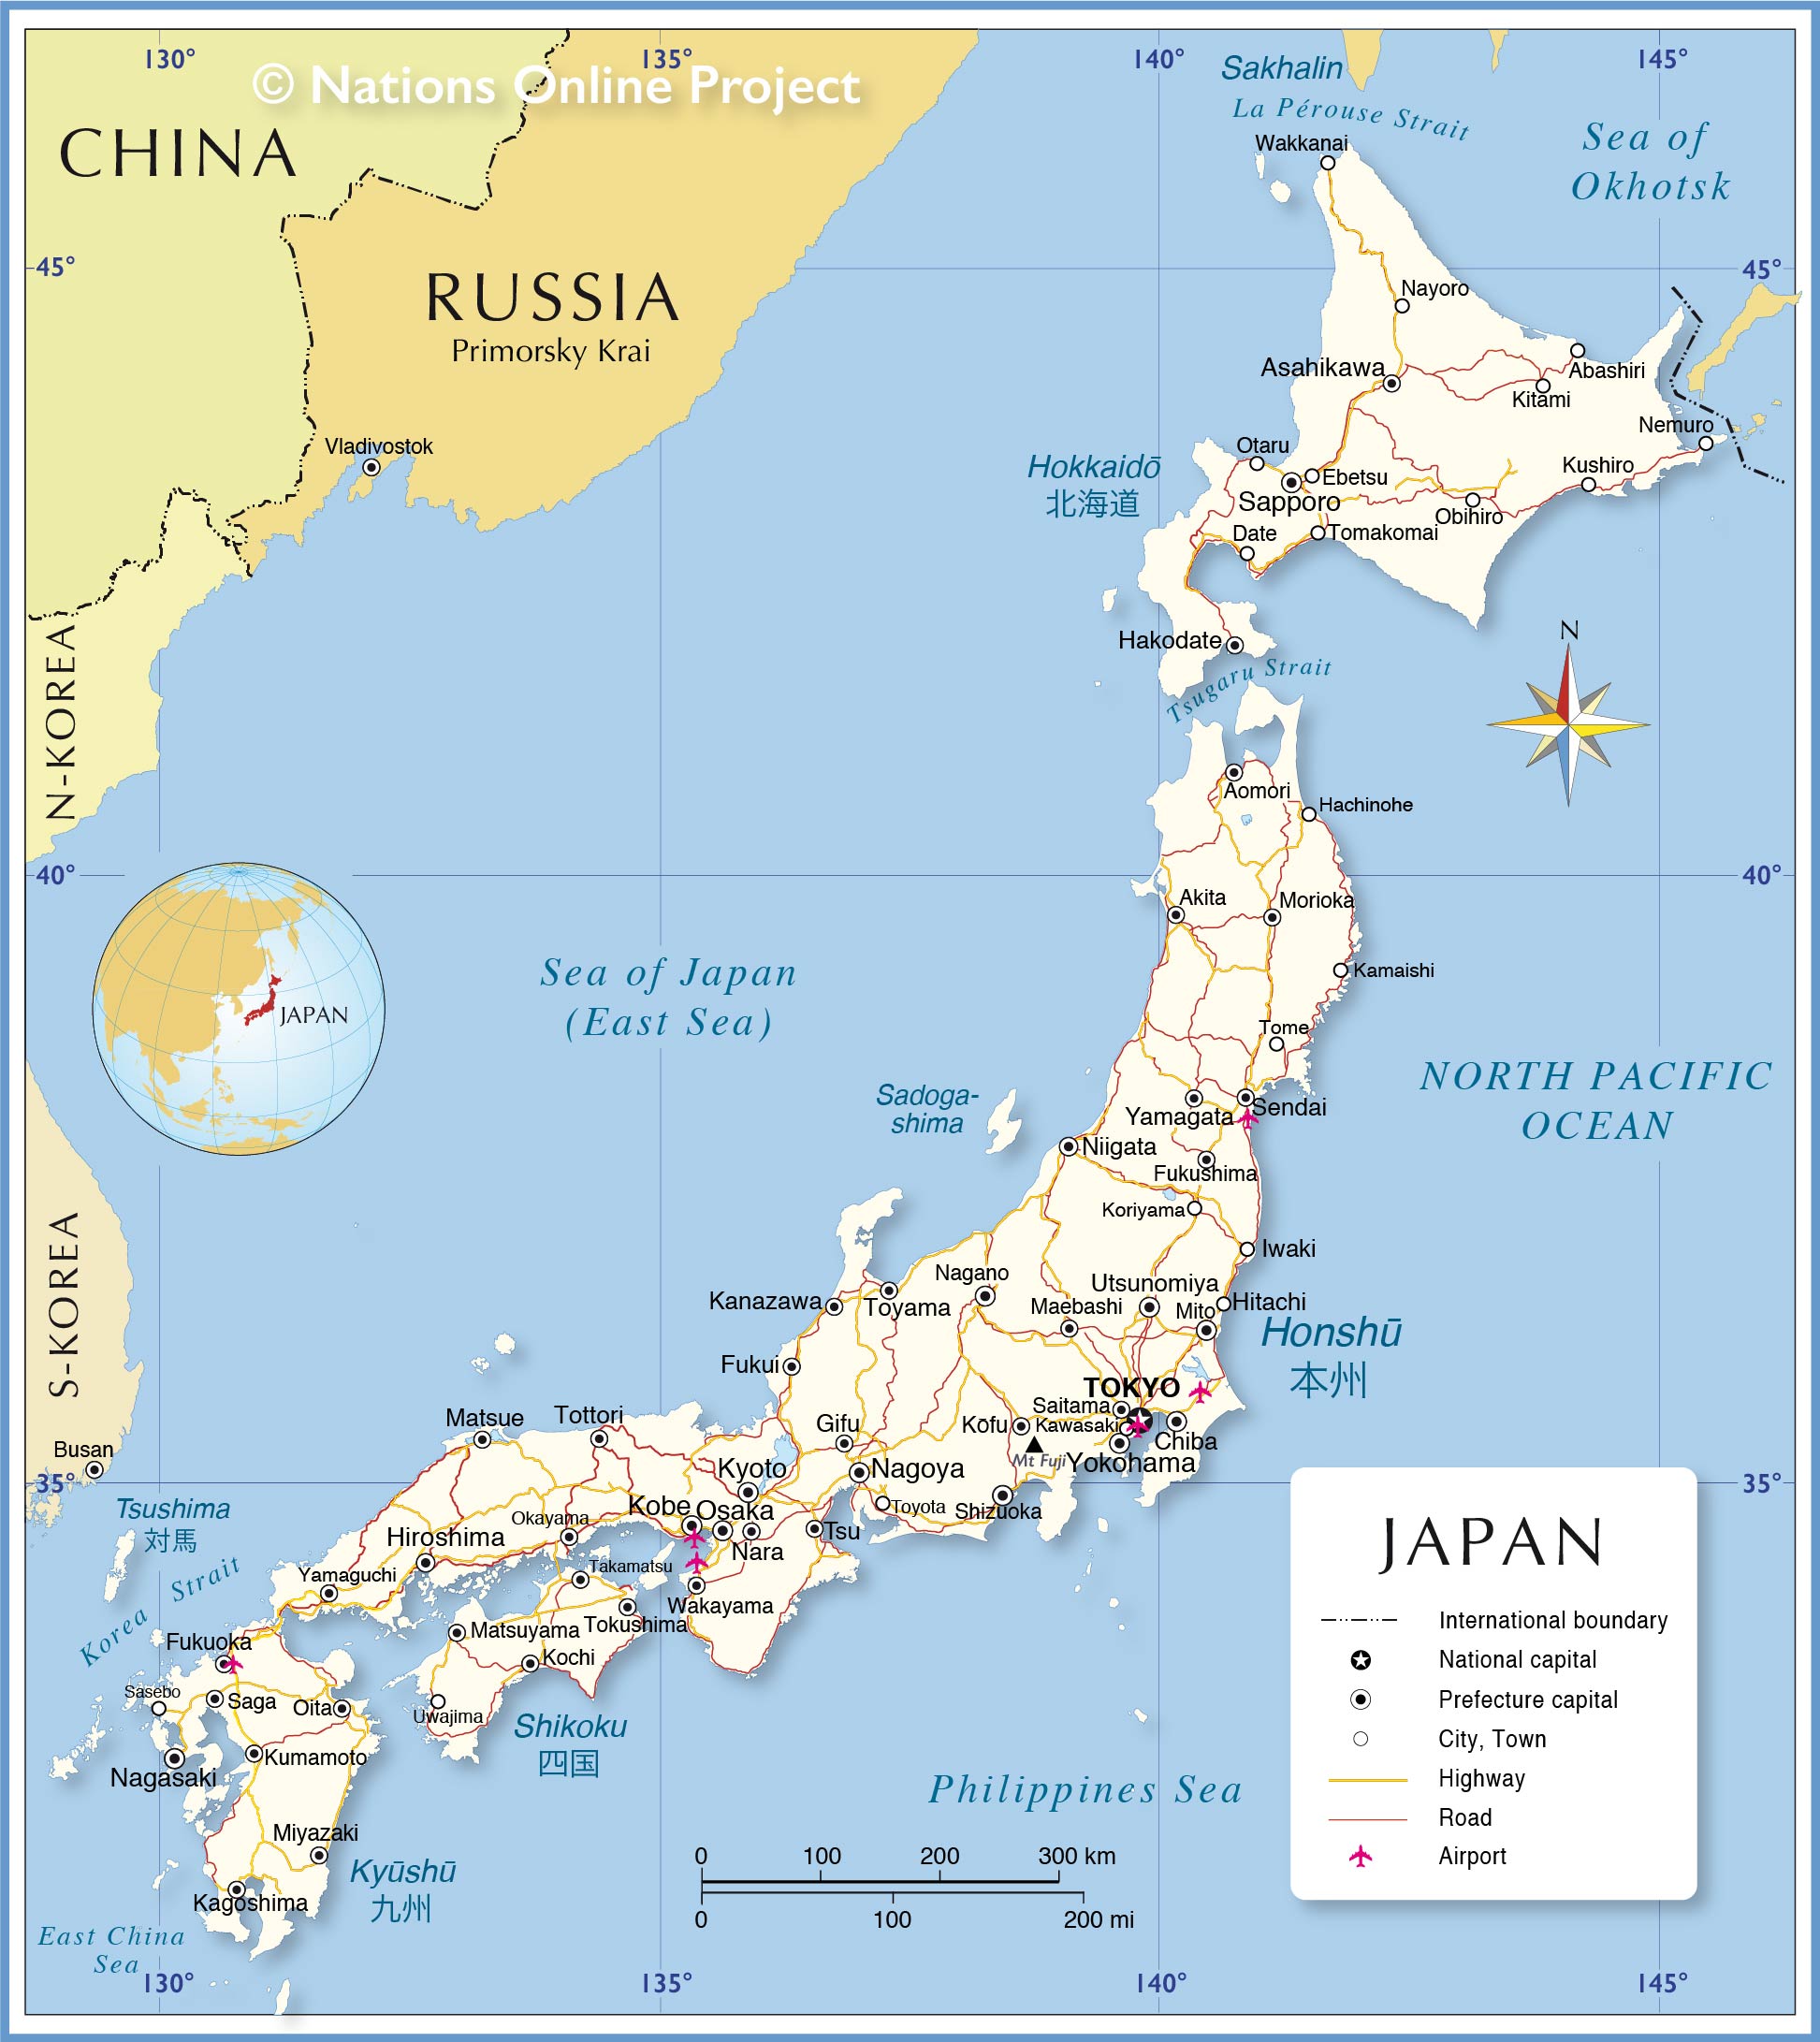 Map Of Japan And Islands Political Map of Japan   Nations Online Project